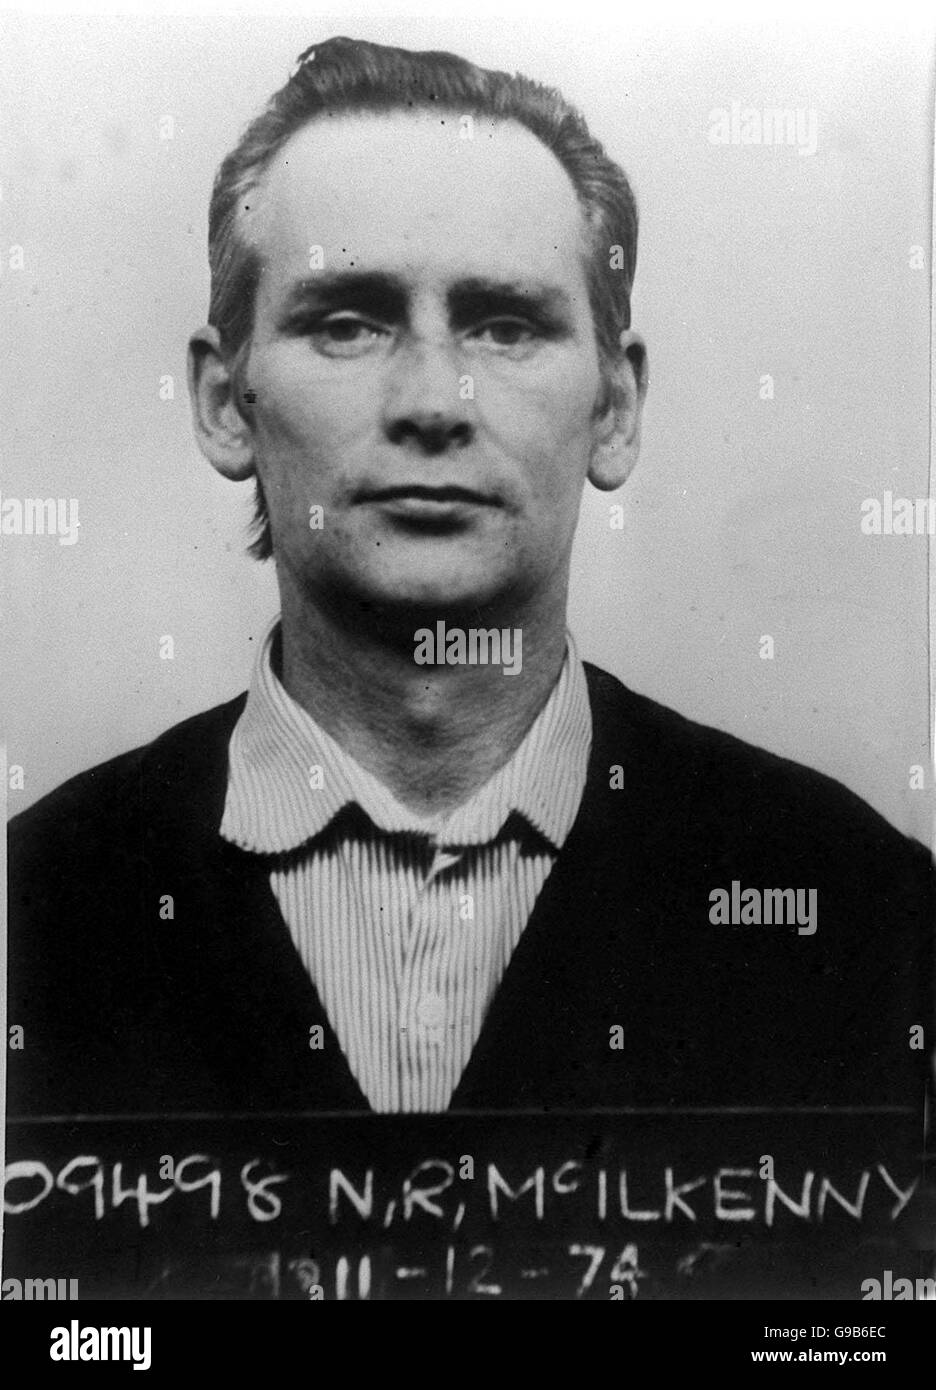 Library file, first issued 14-08-1975. Richard McIlkenny, one of the Birmingham Six wrongly imprisoned for bombings in the Midlands city which killed 21 people, who has died in hospital today. Stock Photo